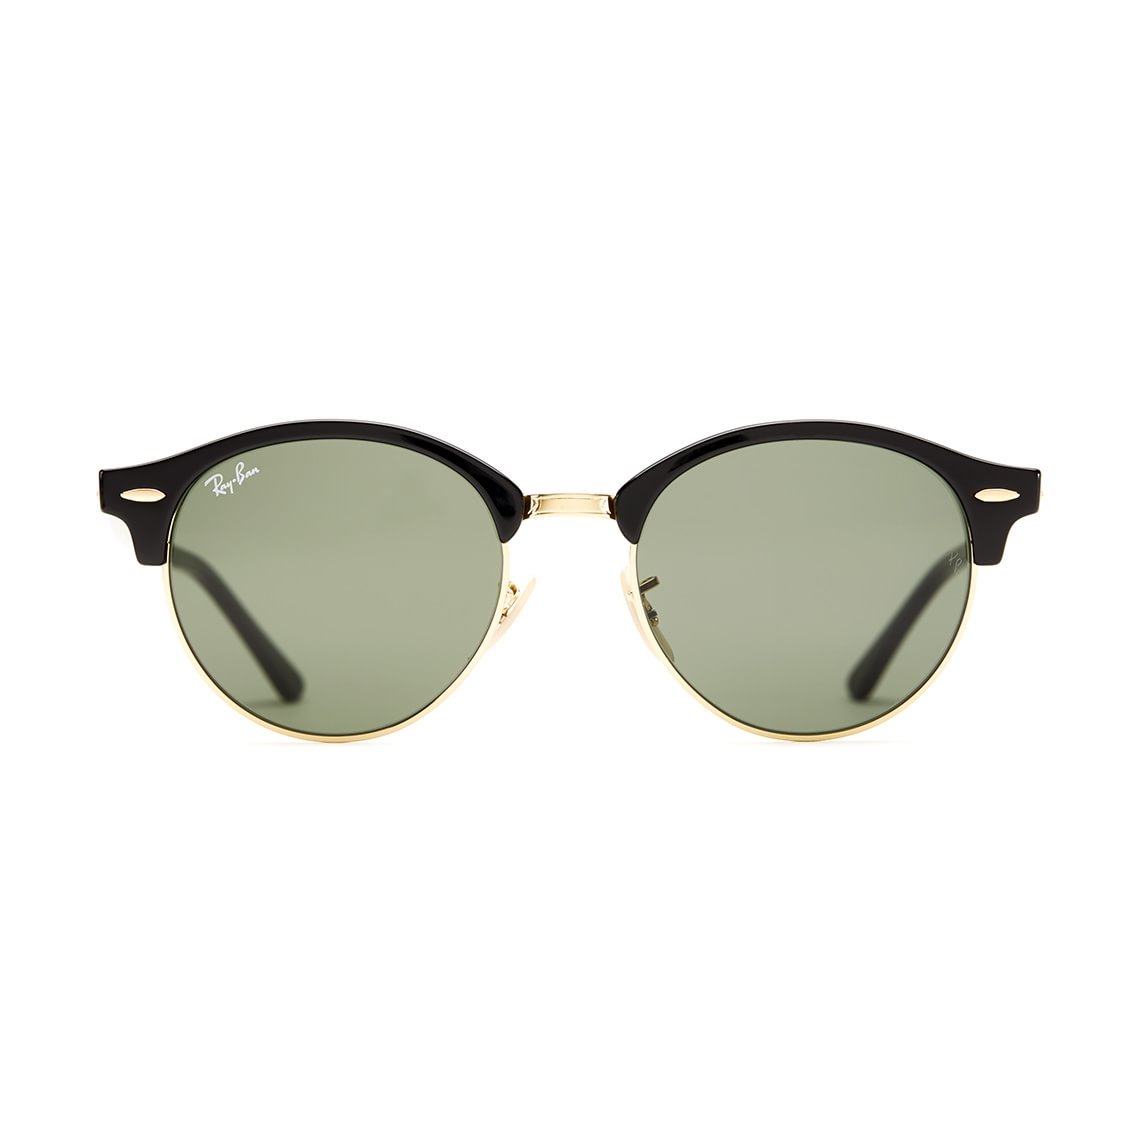 Ray-Ban Clubround RB4246 901 51